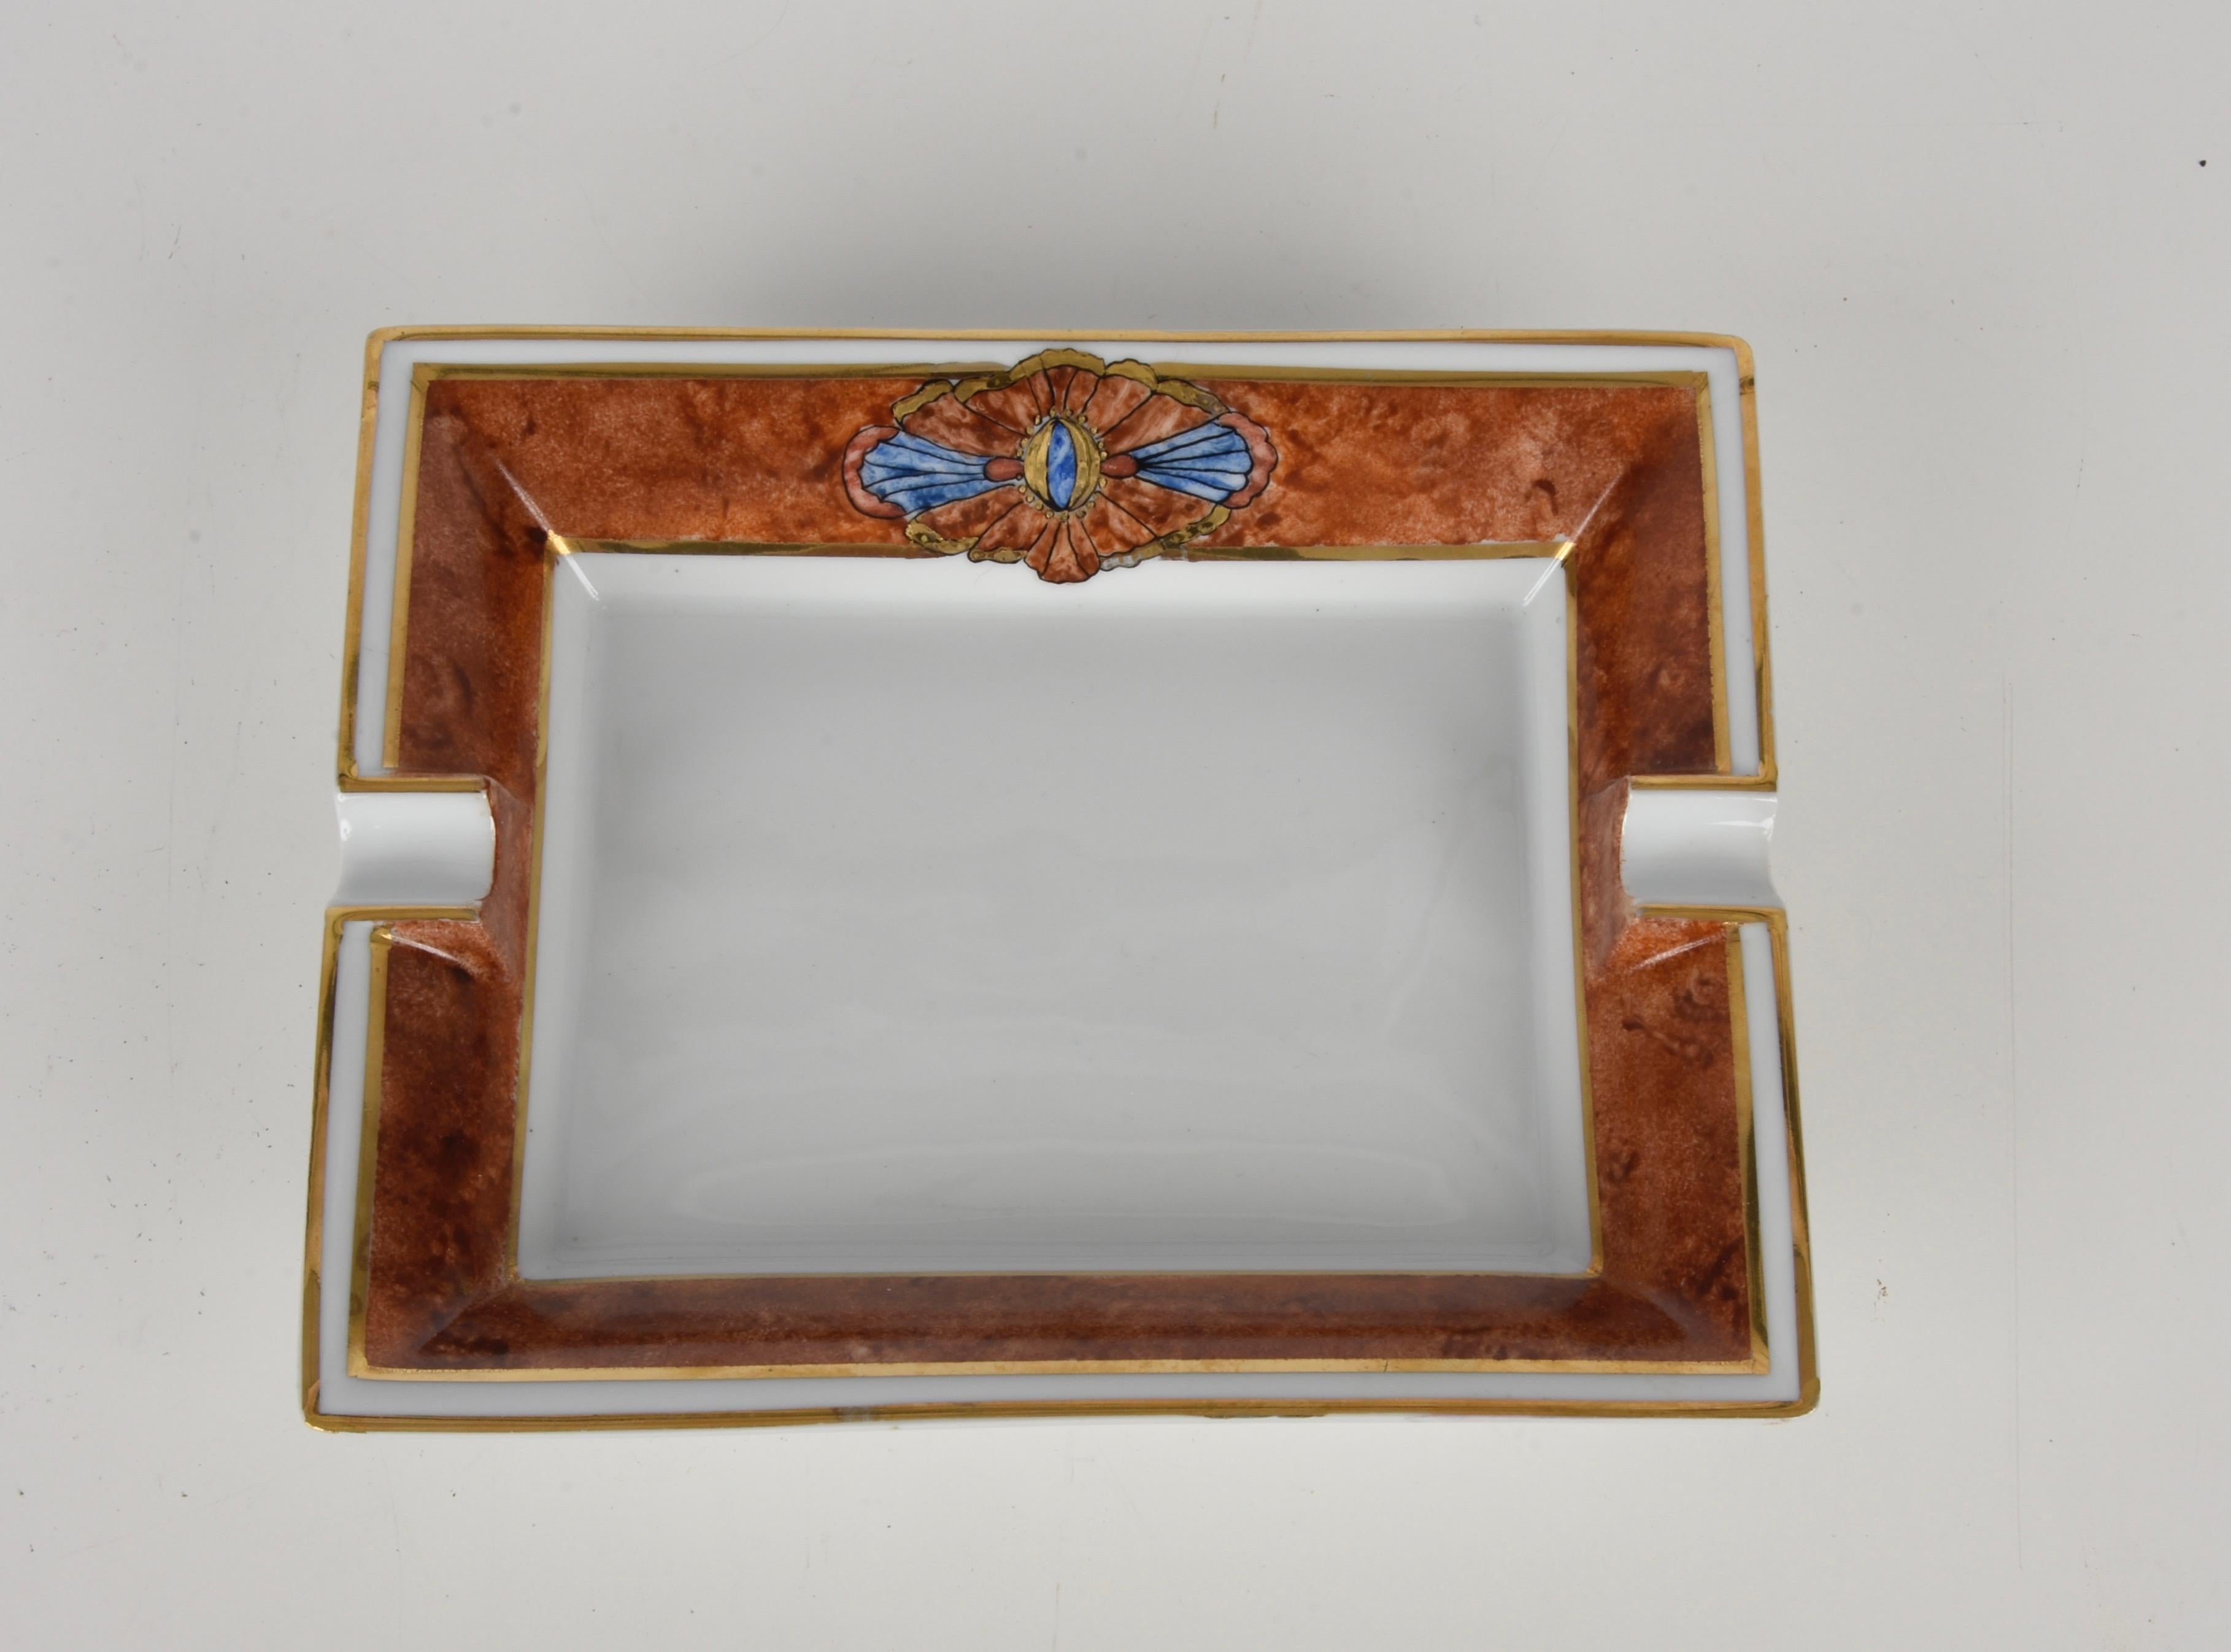 20th Century Limoges Midcentury Hand-Painted by Cevoli White Porcelain French Ashtray, 1980s For Sale